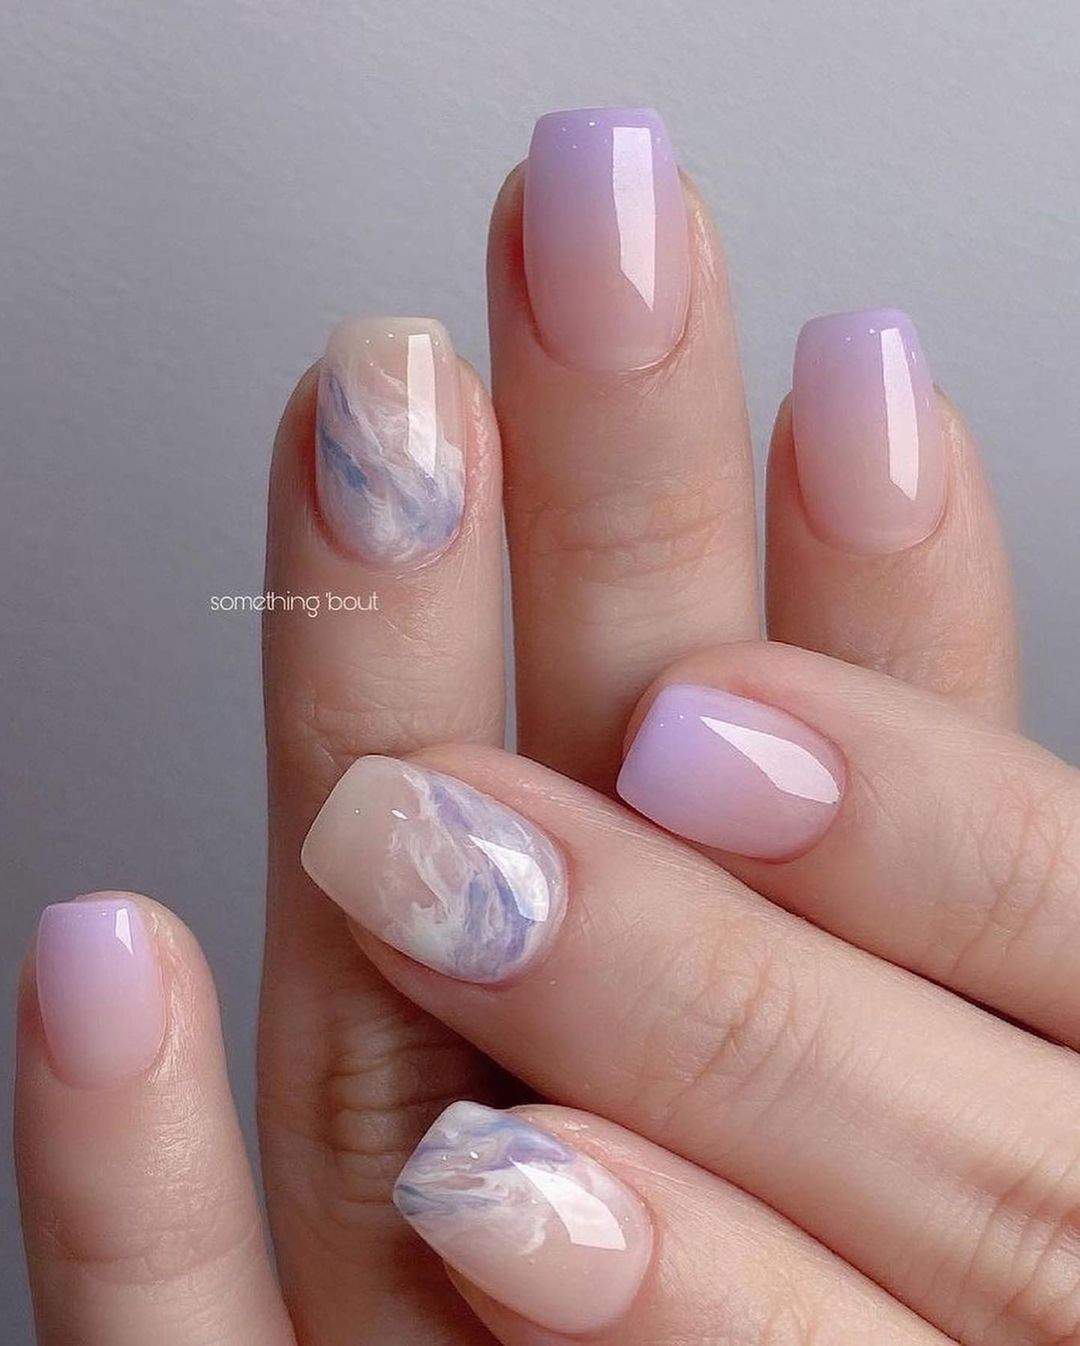 The 100+ Best Nail Designs Trends And Ideas In 2021 images 23